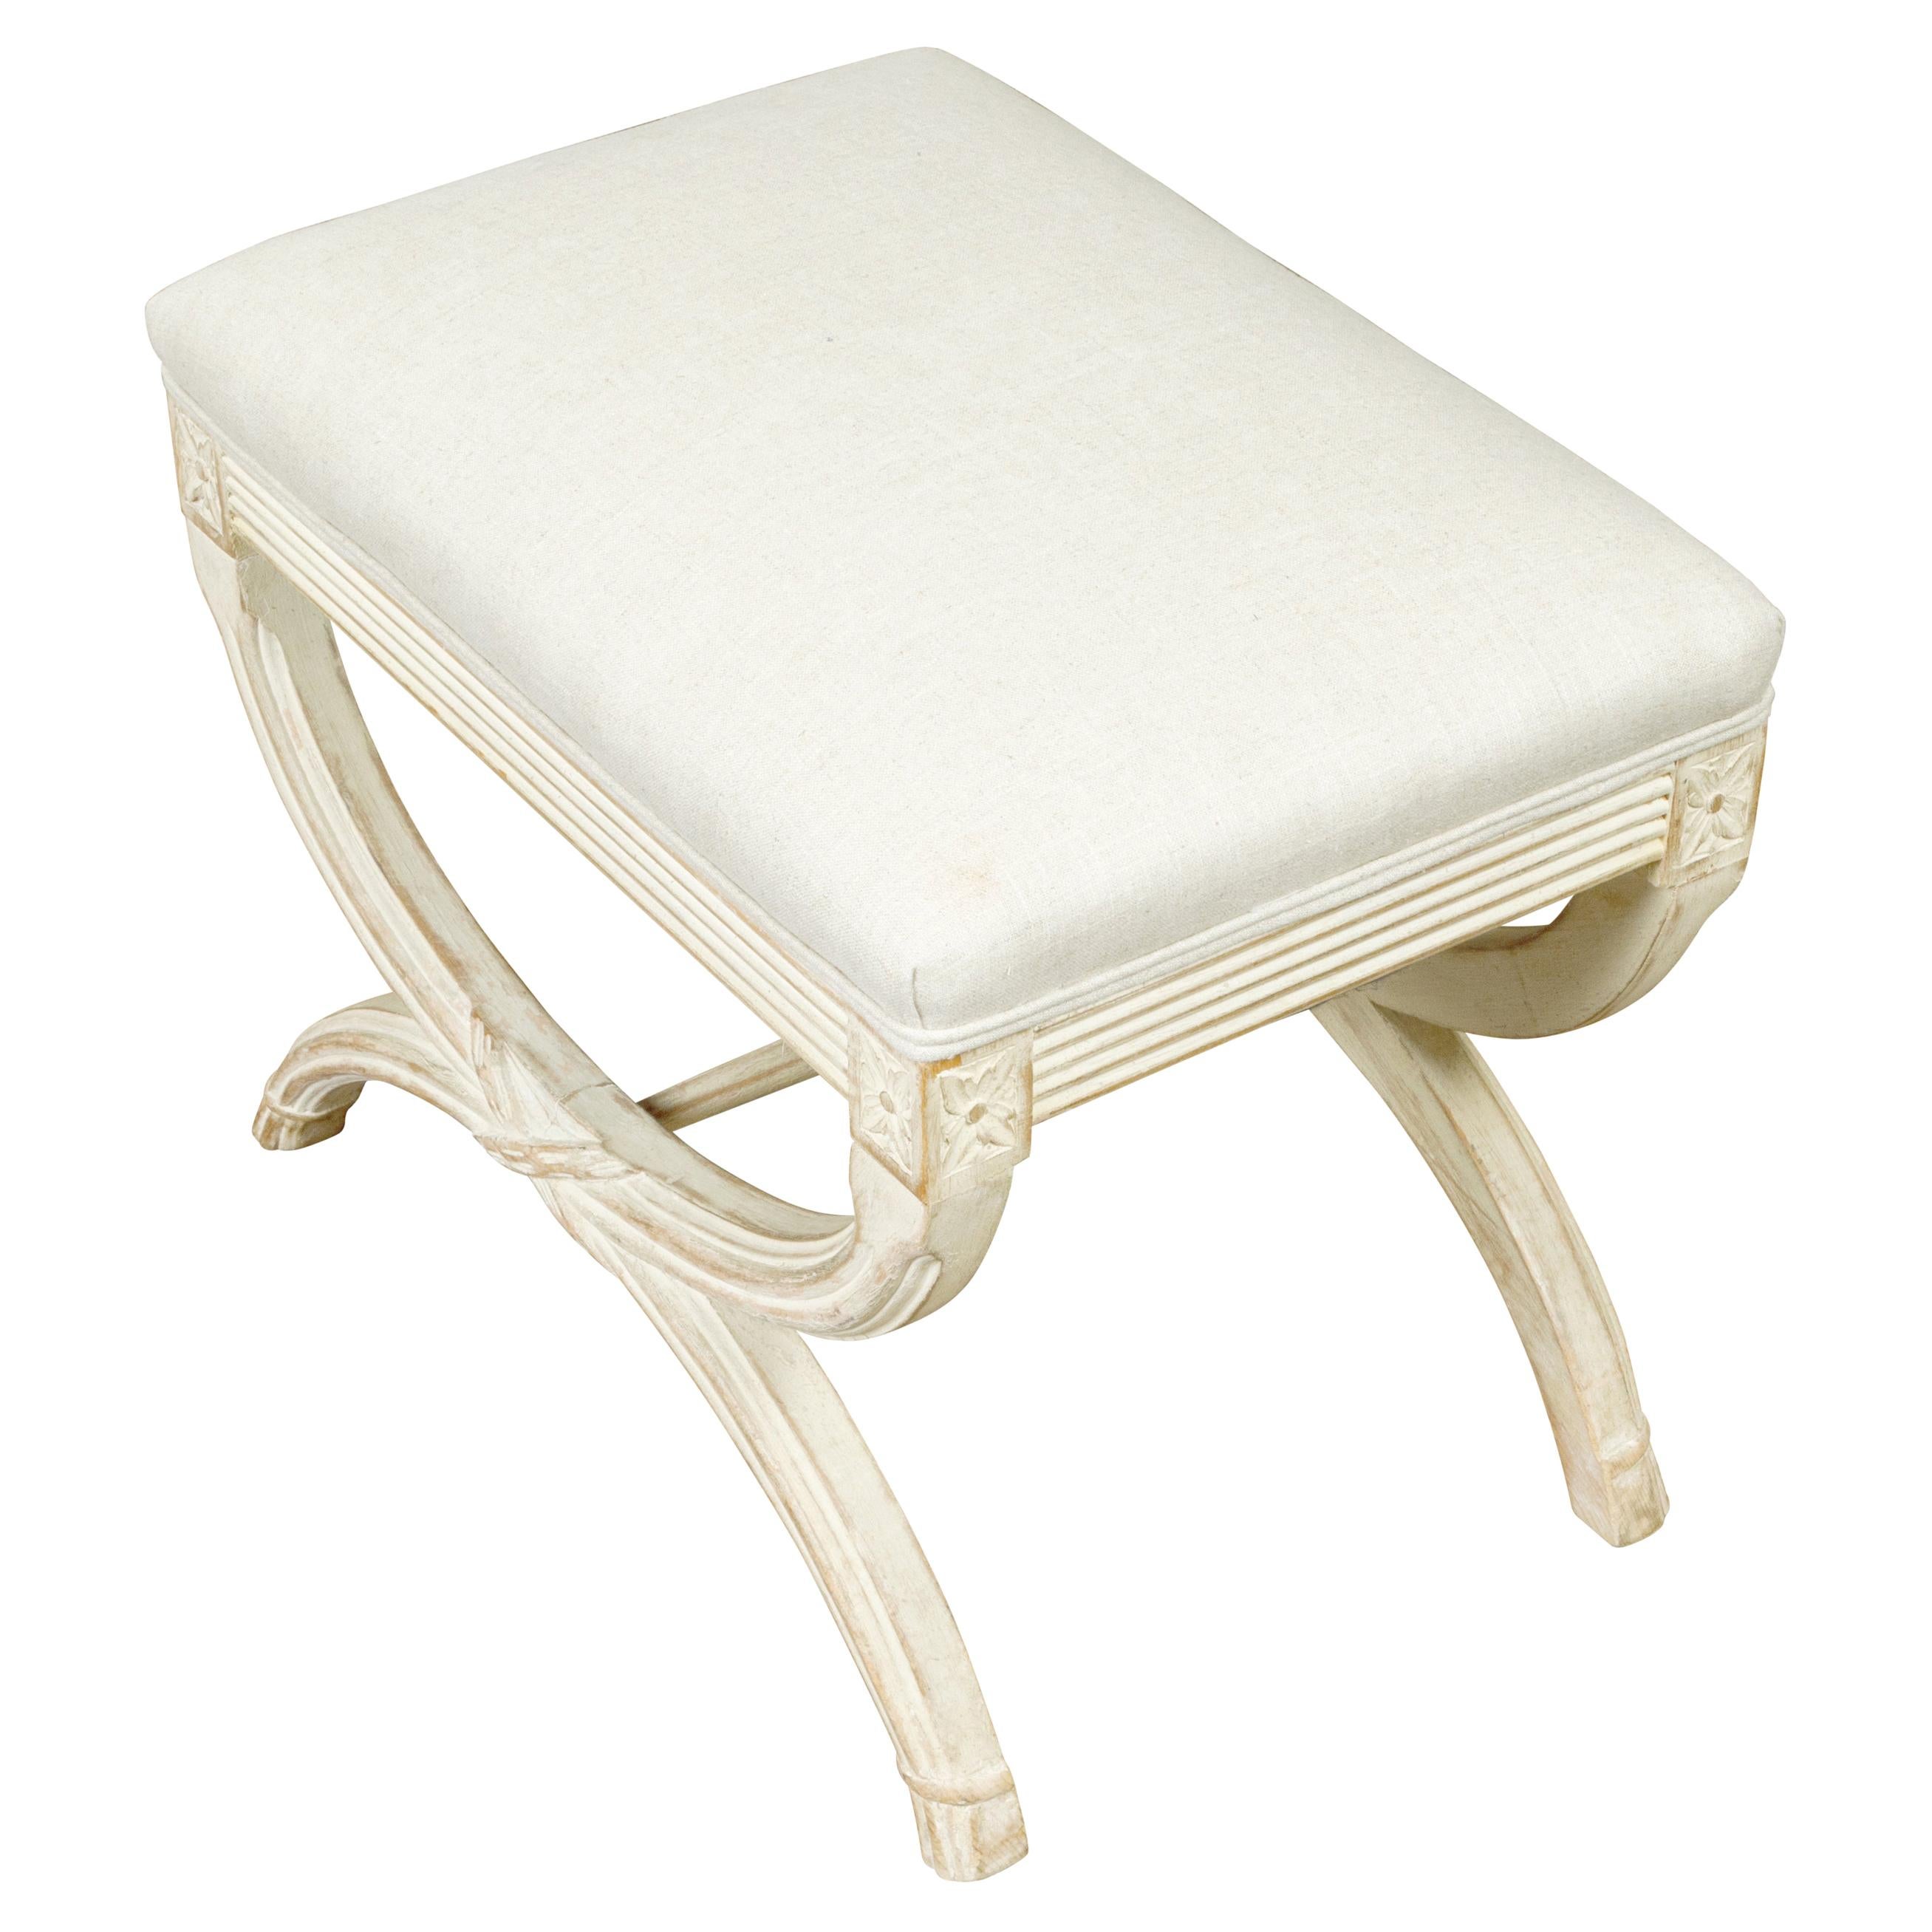 French 1920s Empire Style Painted Upholstered Curule Stool with Carved Rosettes